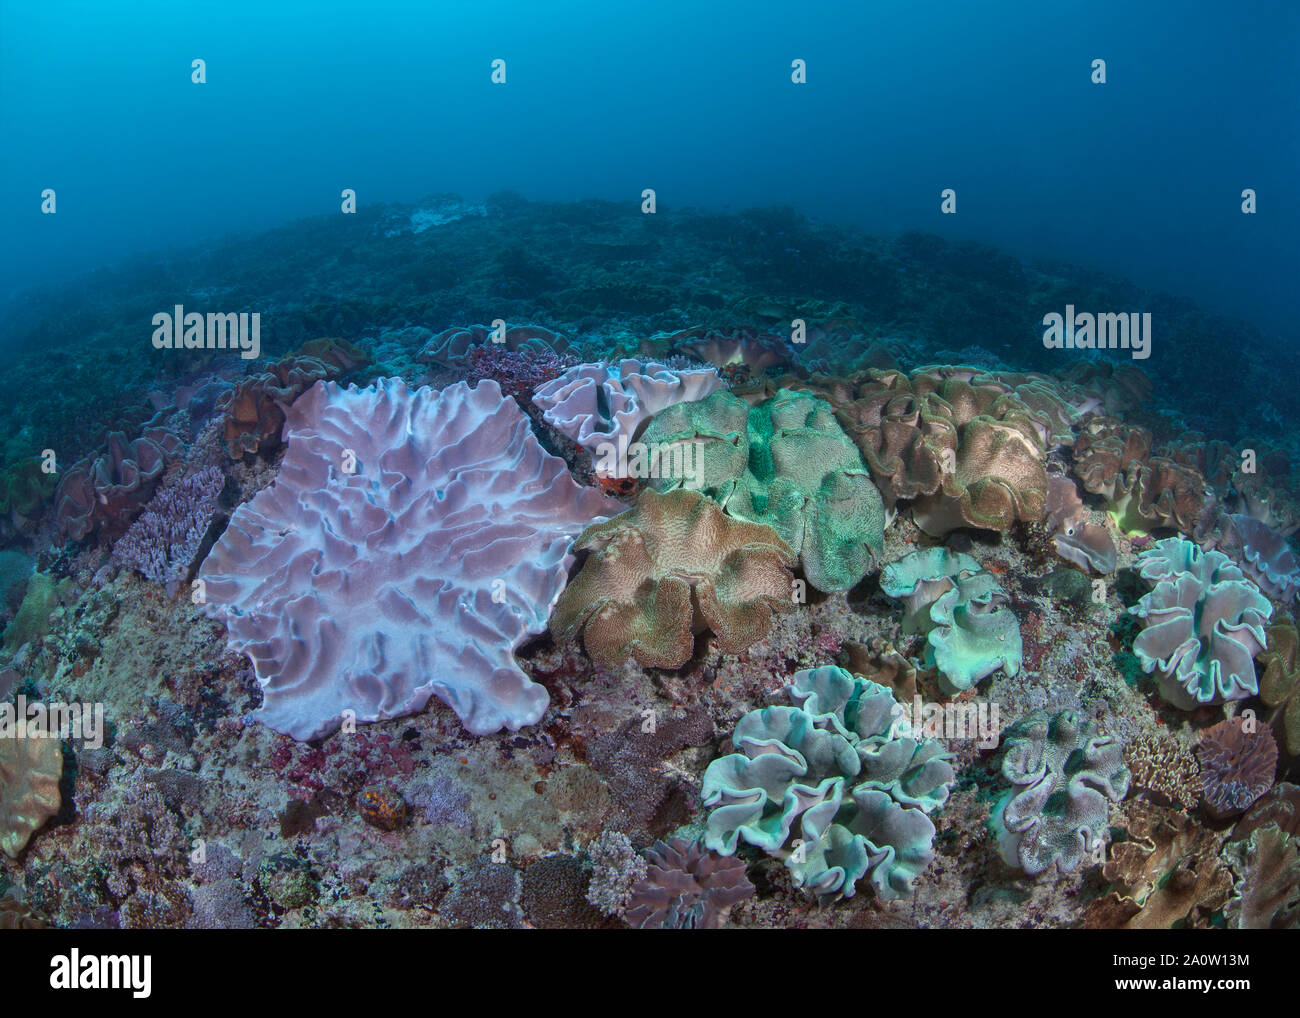 Giant leather corals (Sacrophyton sp) on sea floor in Nusa Lembongan near Bali, Indonesia. 2016. Stock Photo